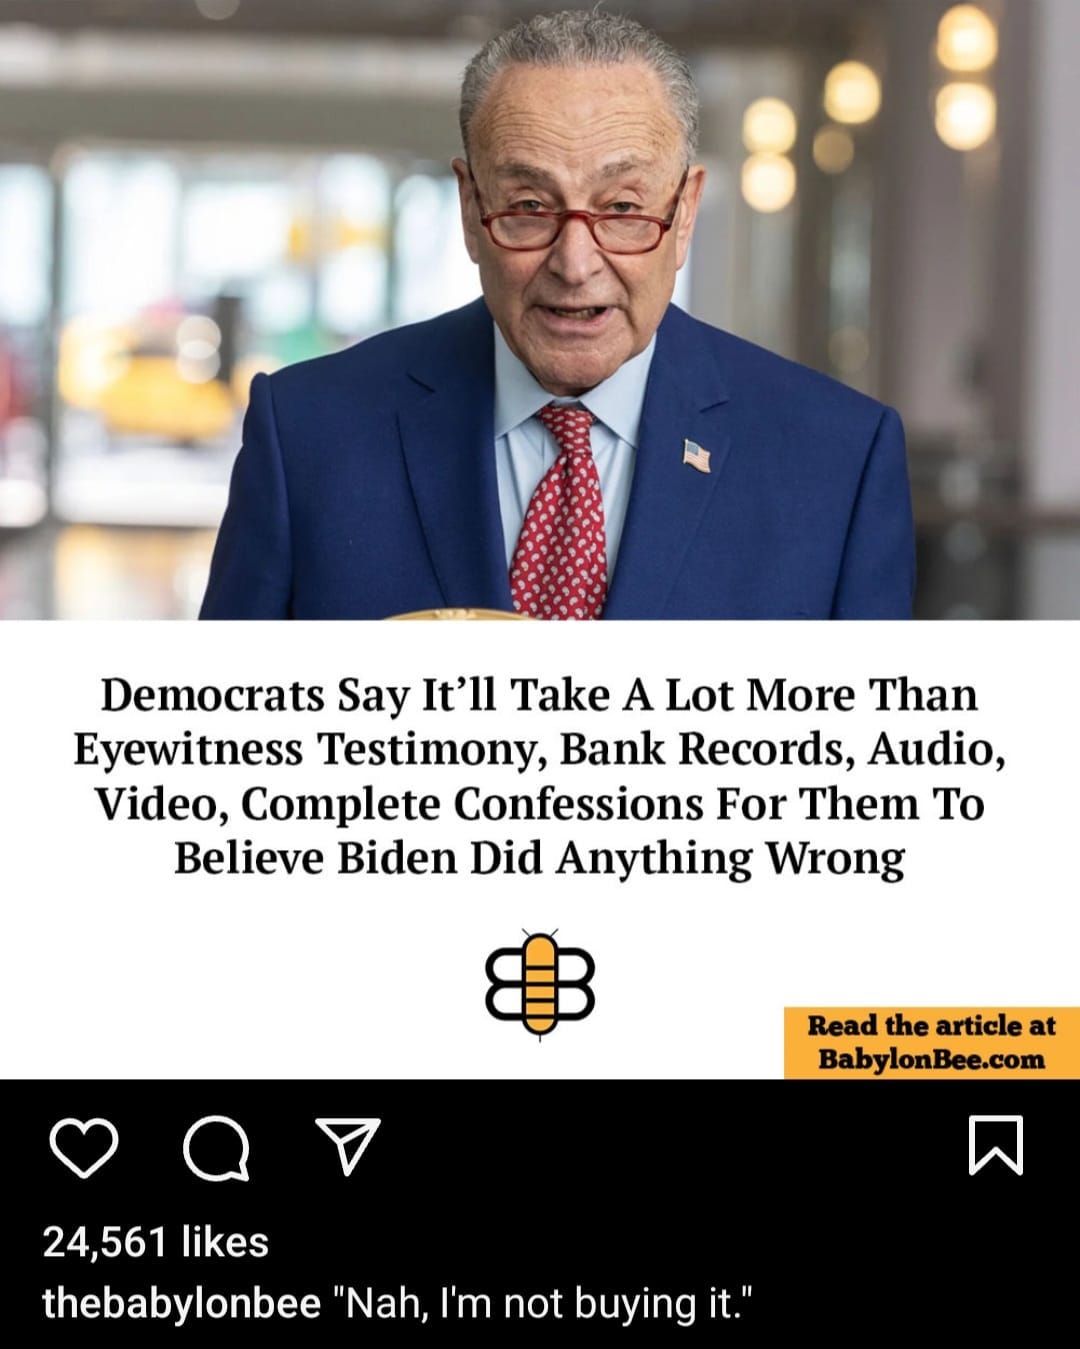 May be an image of 1 person and text that says 'Democrats Say It'll Take A Lot More Than Eyewitness Testimony, Bank Records, Audio, Video, Complete Confessions For Them To Believe Biden Did Anything Wrong Read the article at BabylonBee.com 24,561 likes thebabylonbee "Nah, I'm not buying it."'